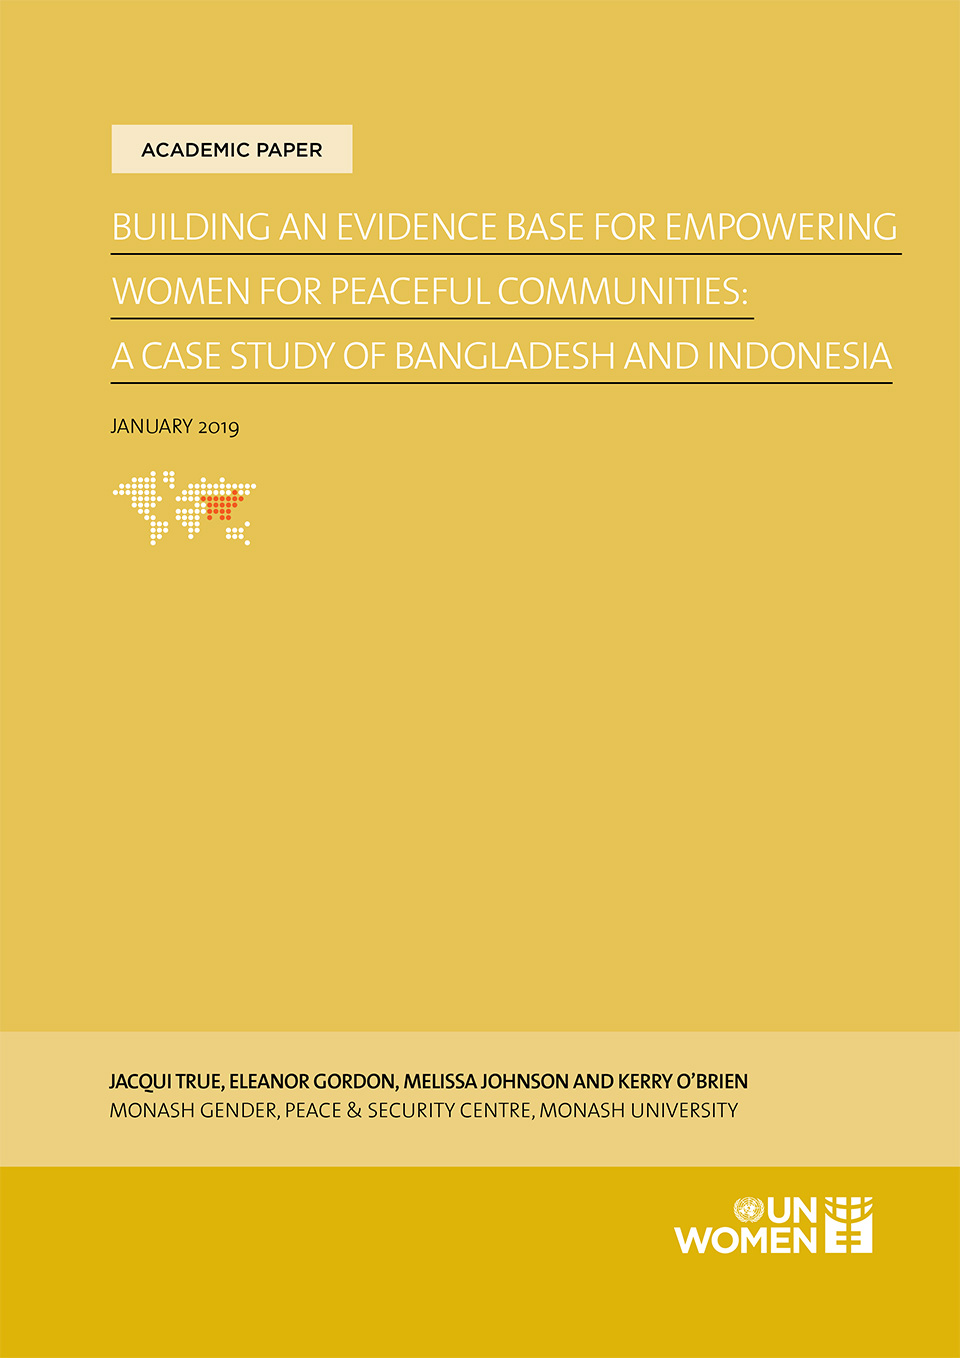 BUILDING AN EVIDENCE BASE FOR EMPOWERING WOMEN FOR PEACEFUL COMMUNITIES:  A CASE STUDY OF BANGLADESH AND INDONESIA